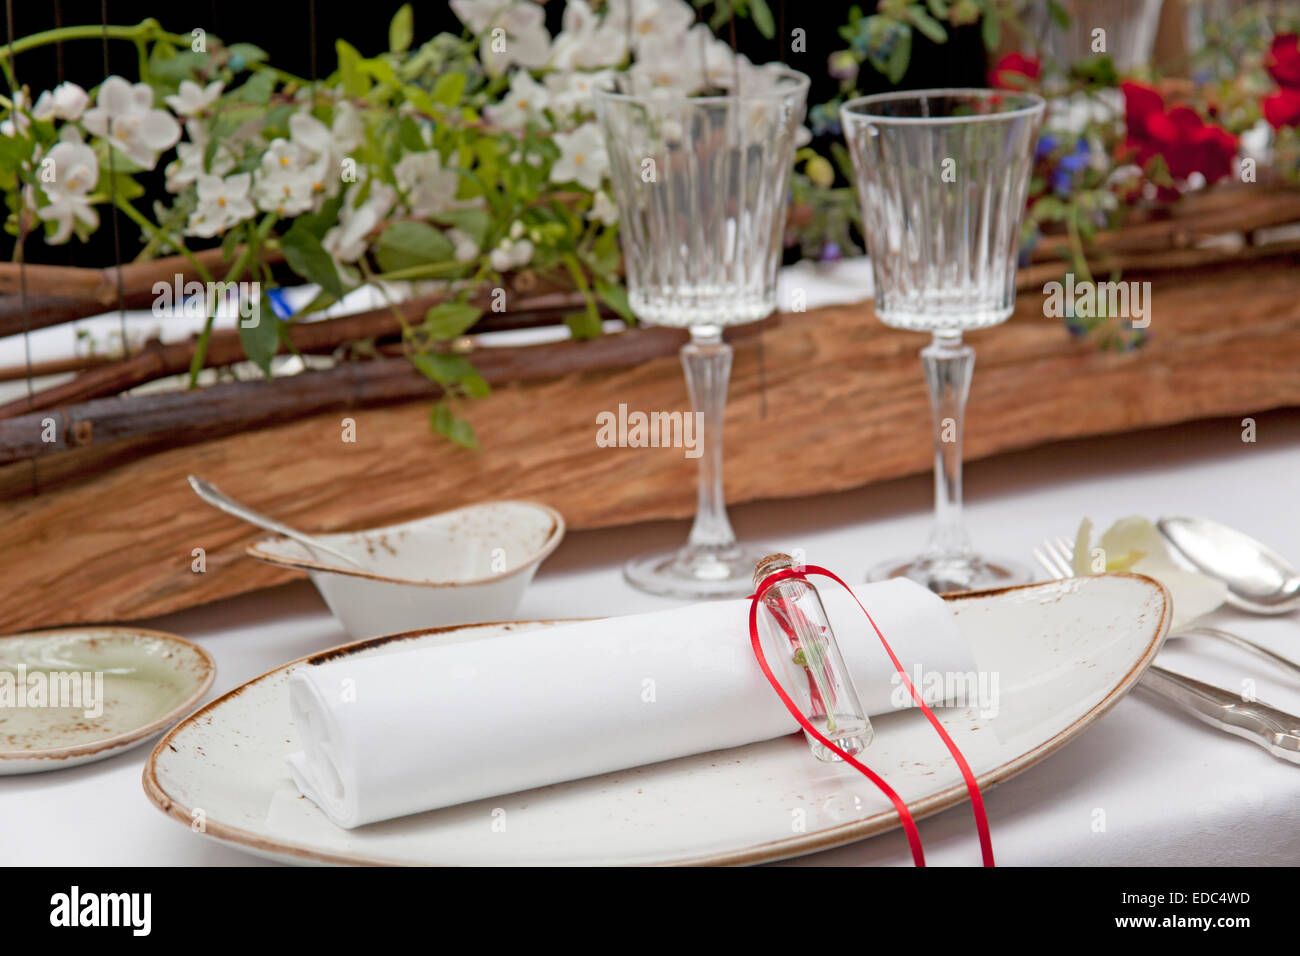 set-up table Foto Stock